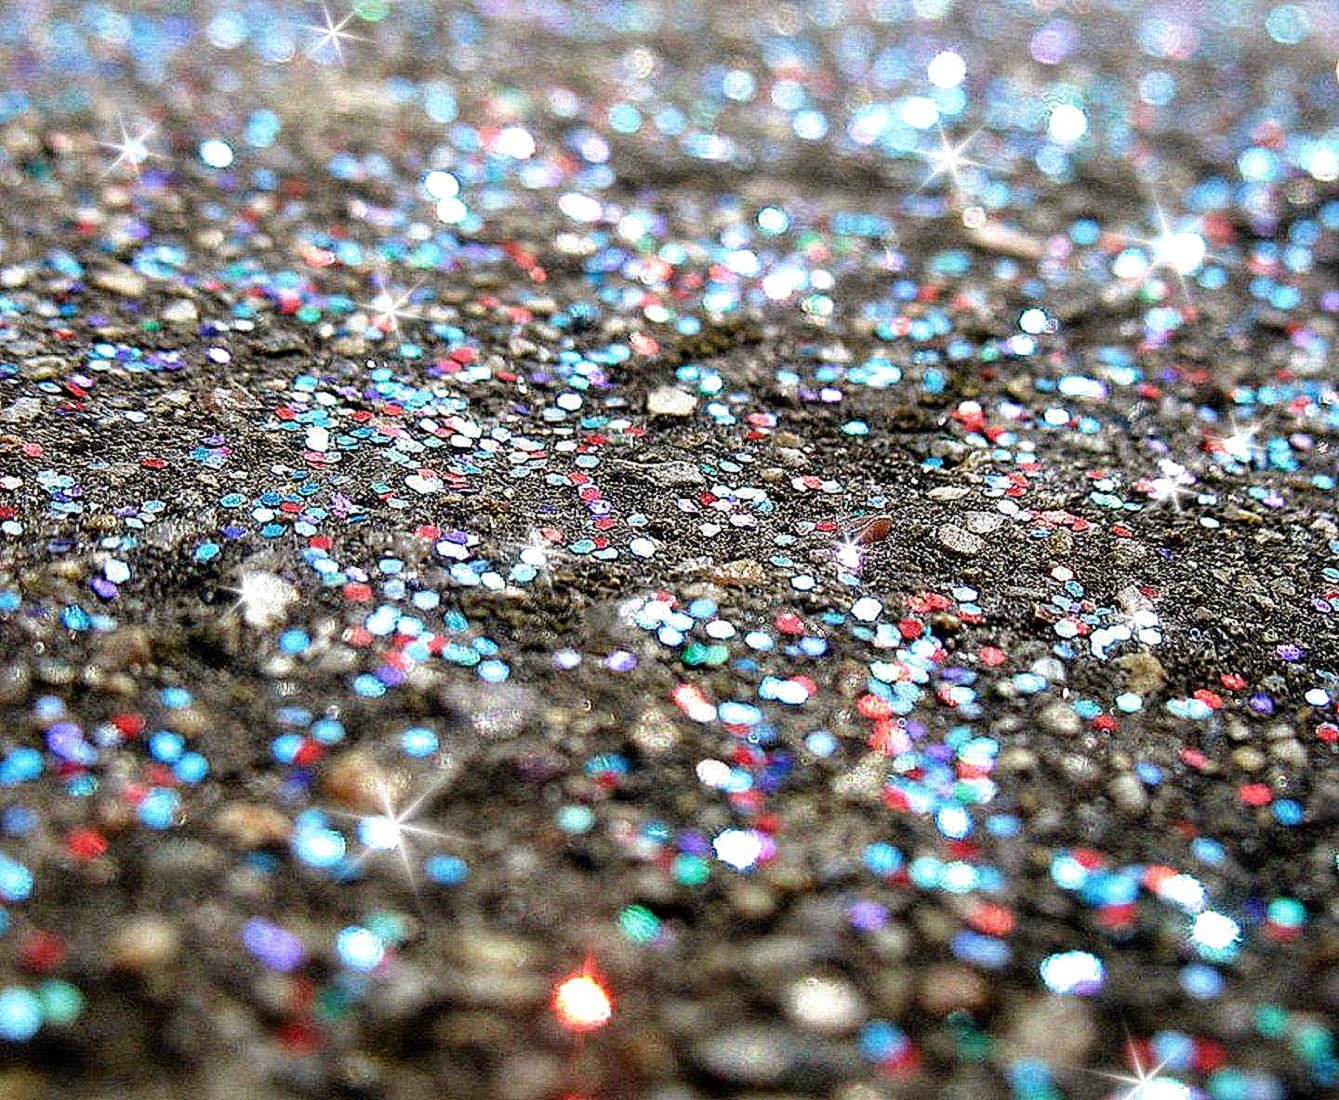 Silver glitter 149664 High Quality and Resolution